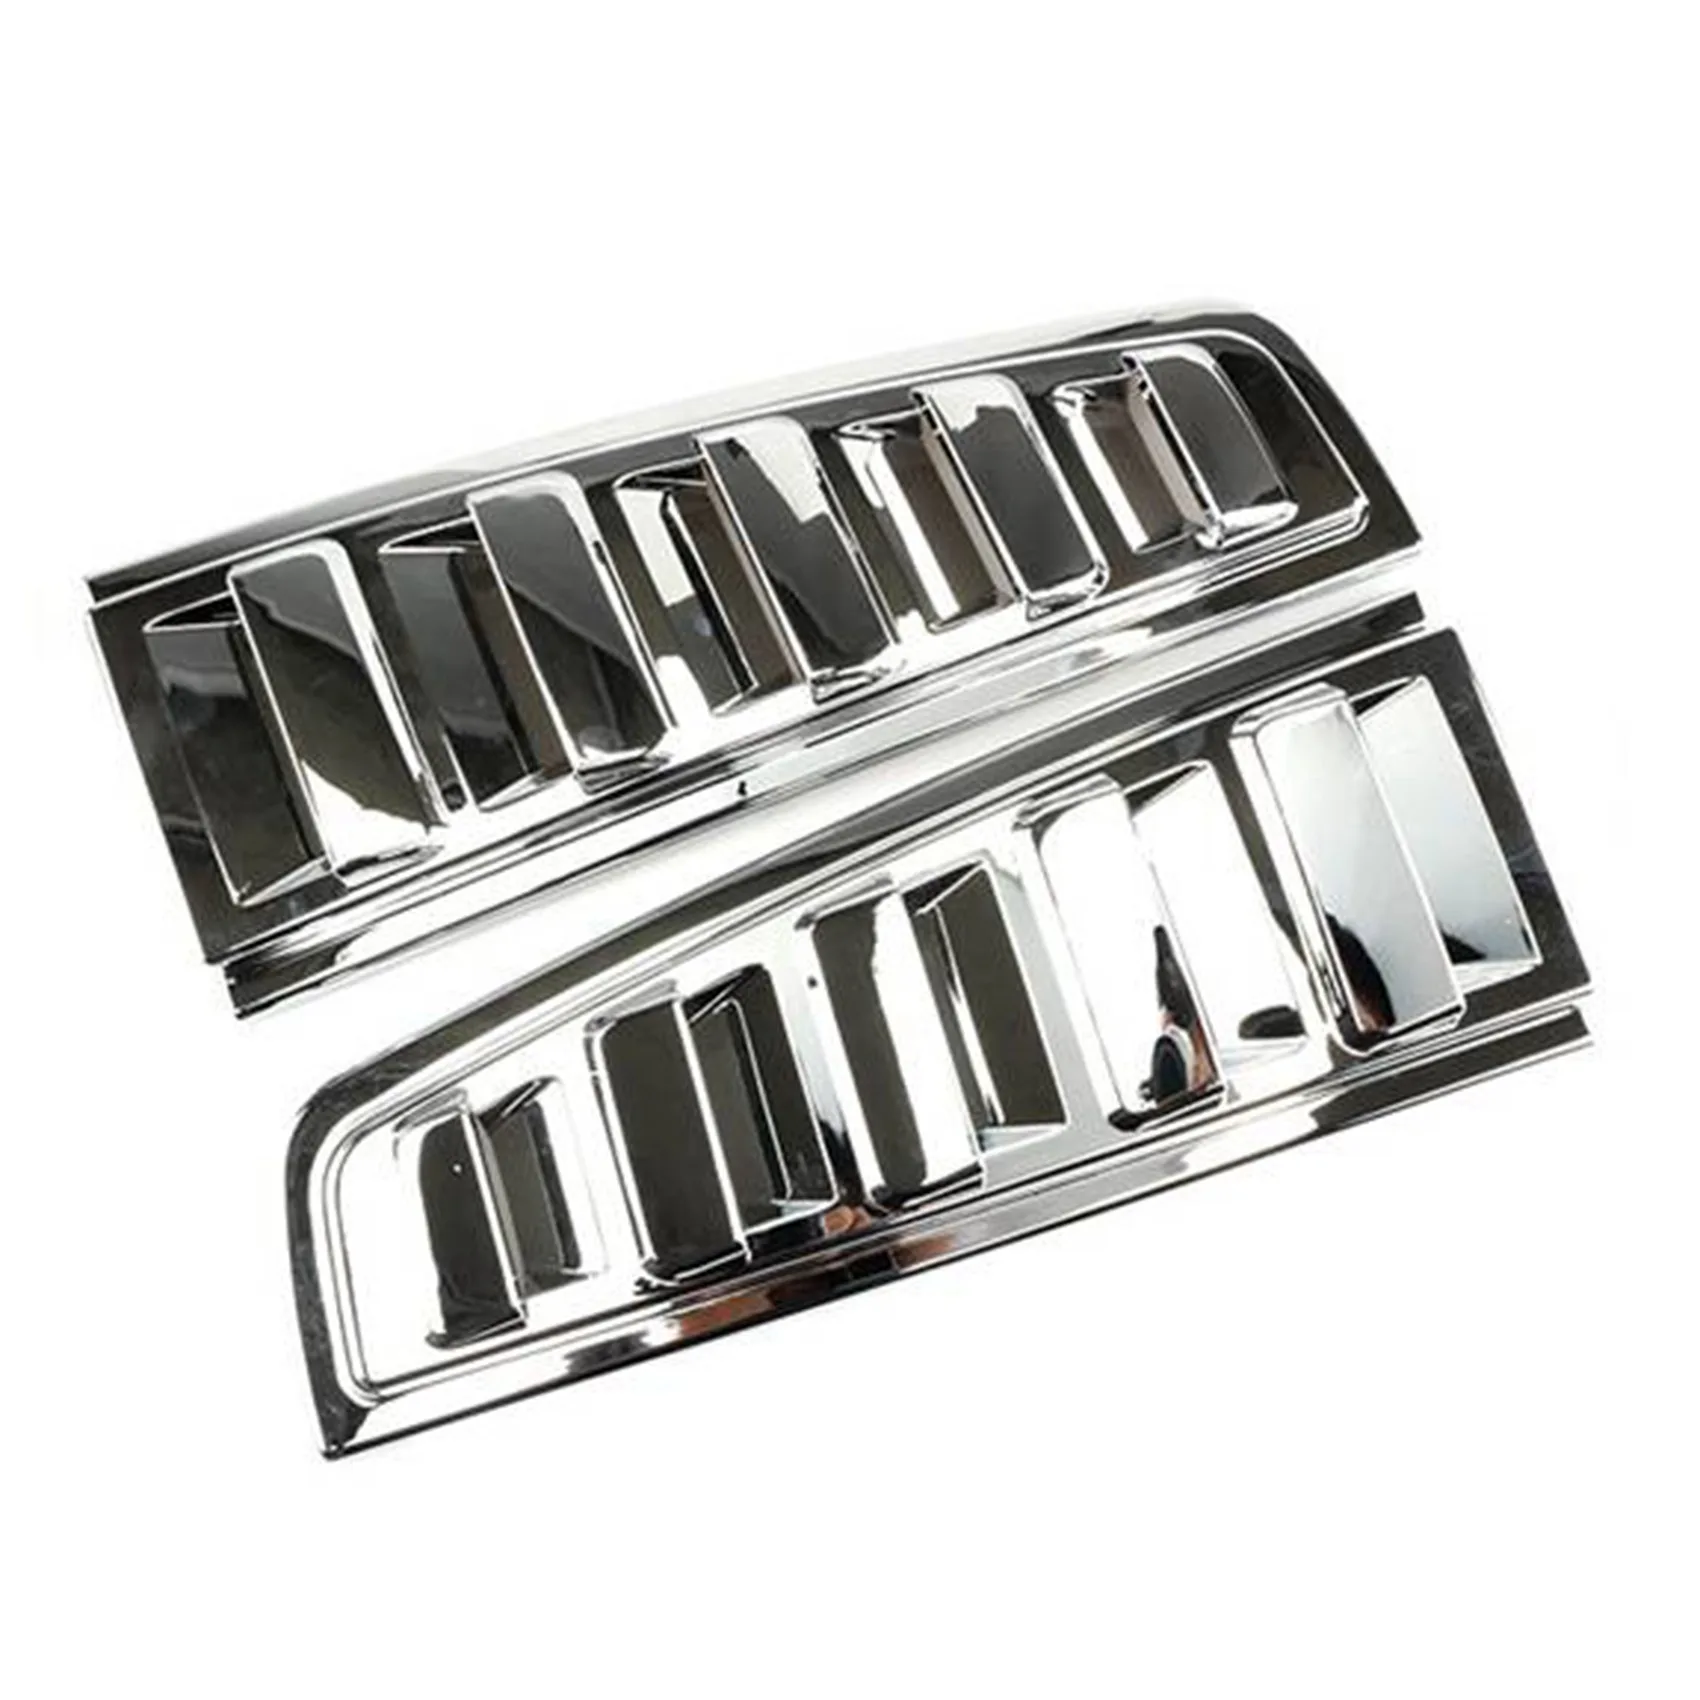 

Car Modification Rear Upper Tail Light Lamp Vent Cover Bezel Guard for Hummer H2 SUV 2003-2009